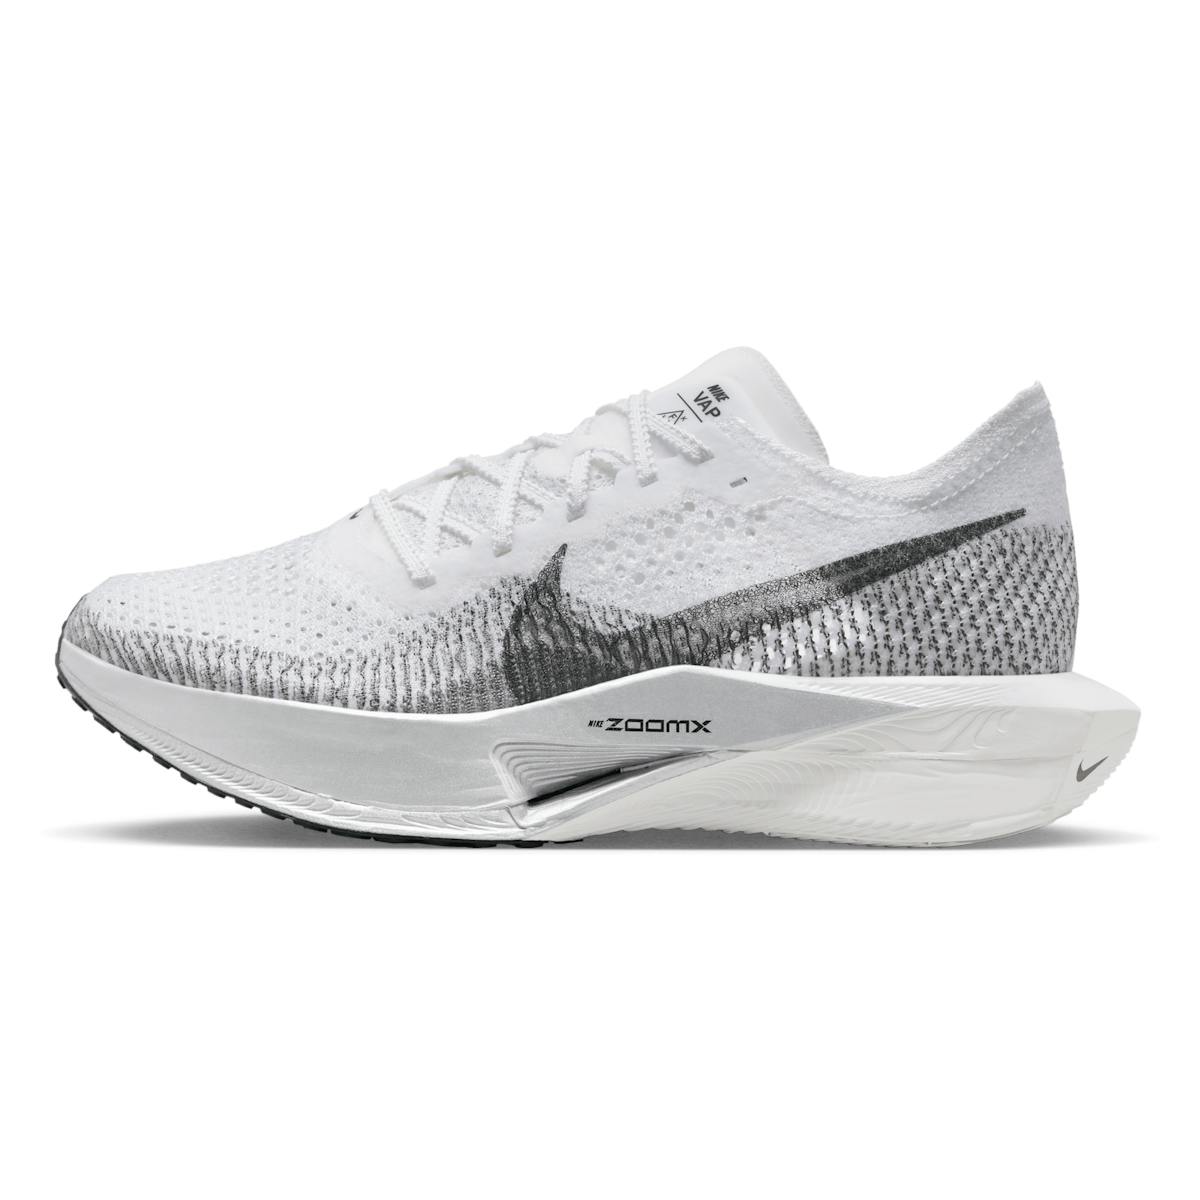 Nike ZoomX Vaporfly 3 White Particle Grey (Women's)